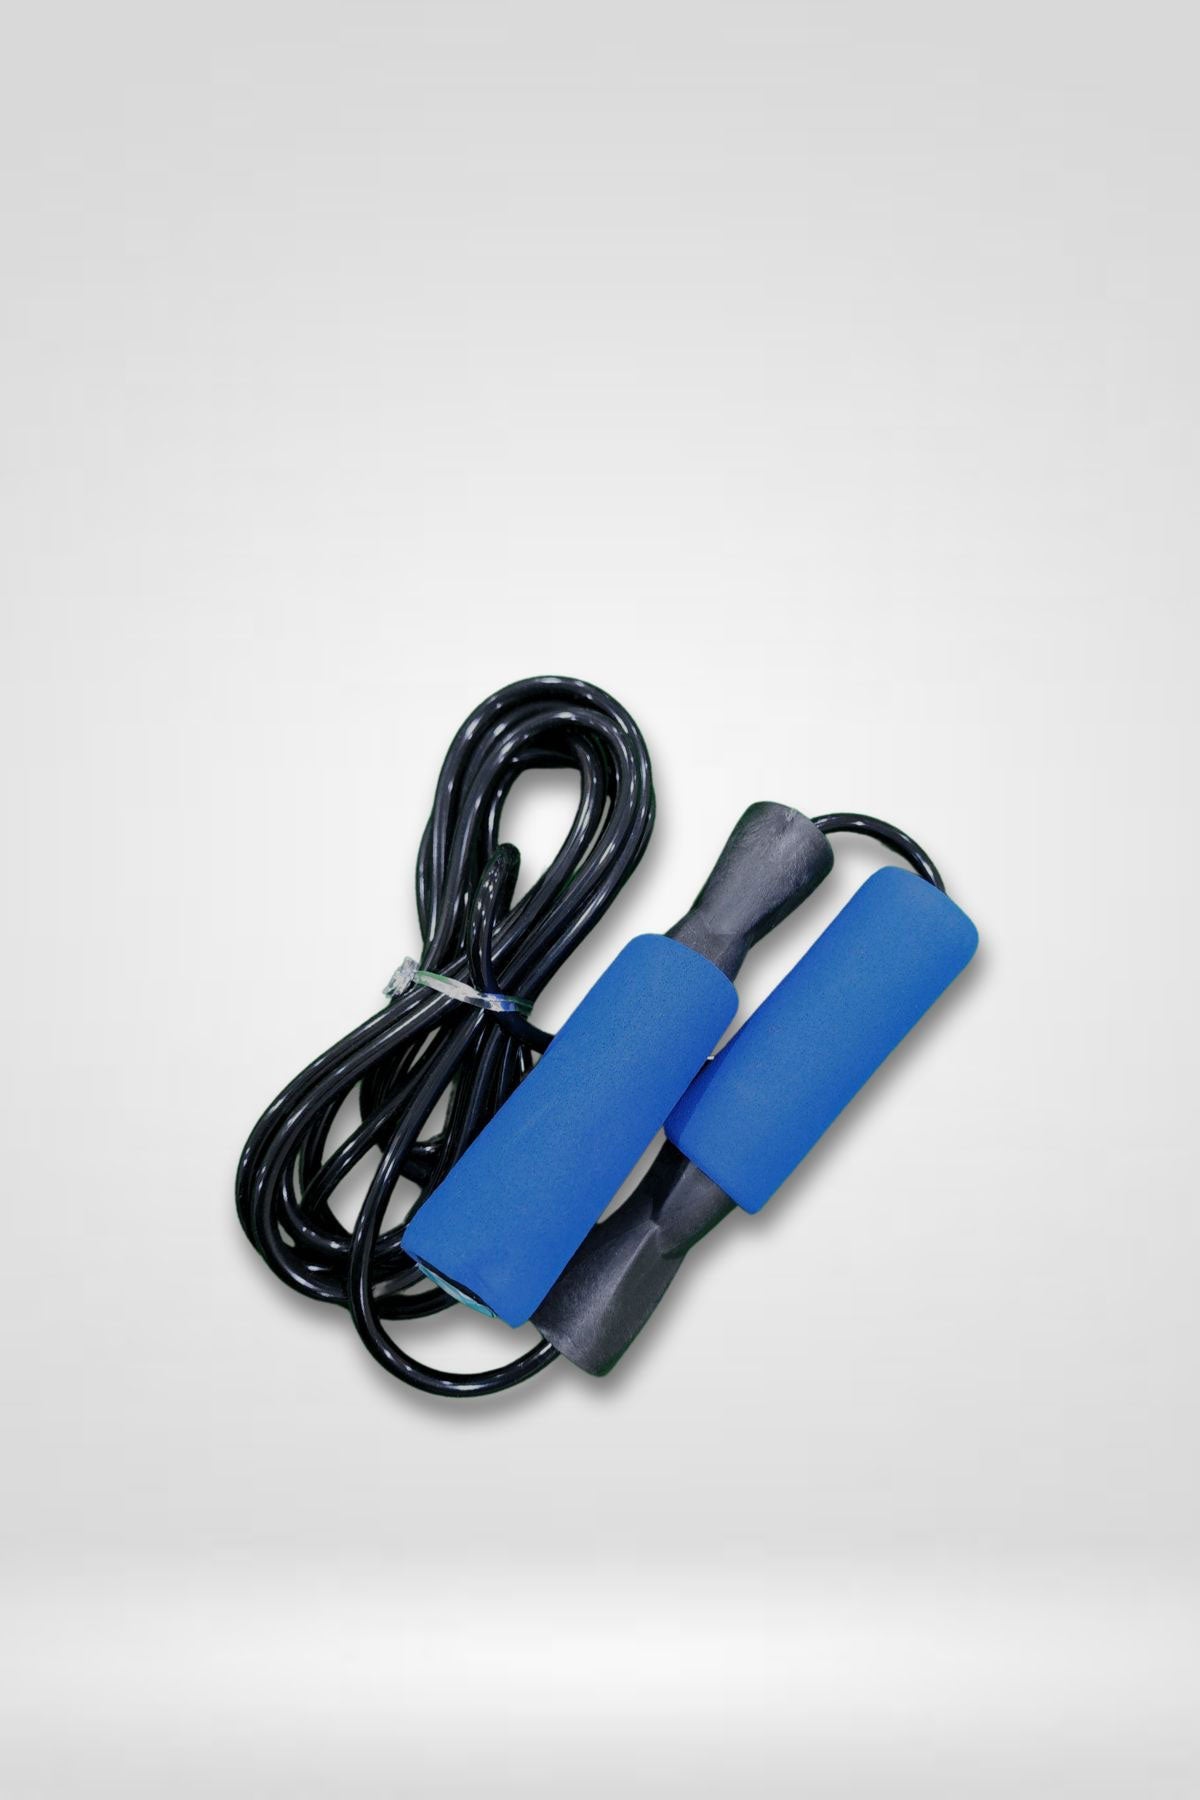 AMPLIFY SKIPPING ROPE- ULTRA BLUE - The Orion Fit